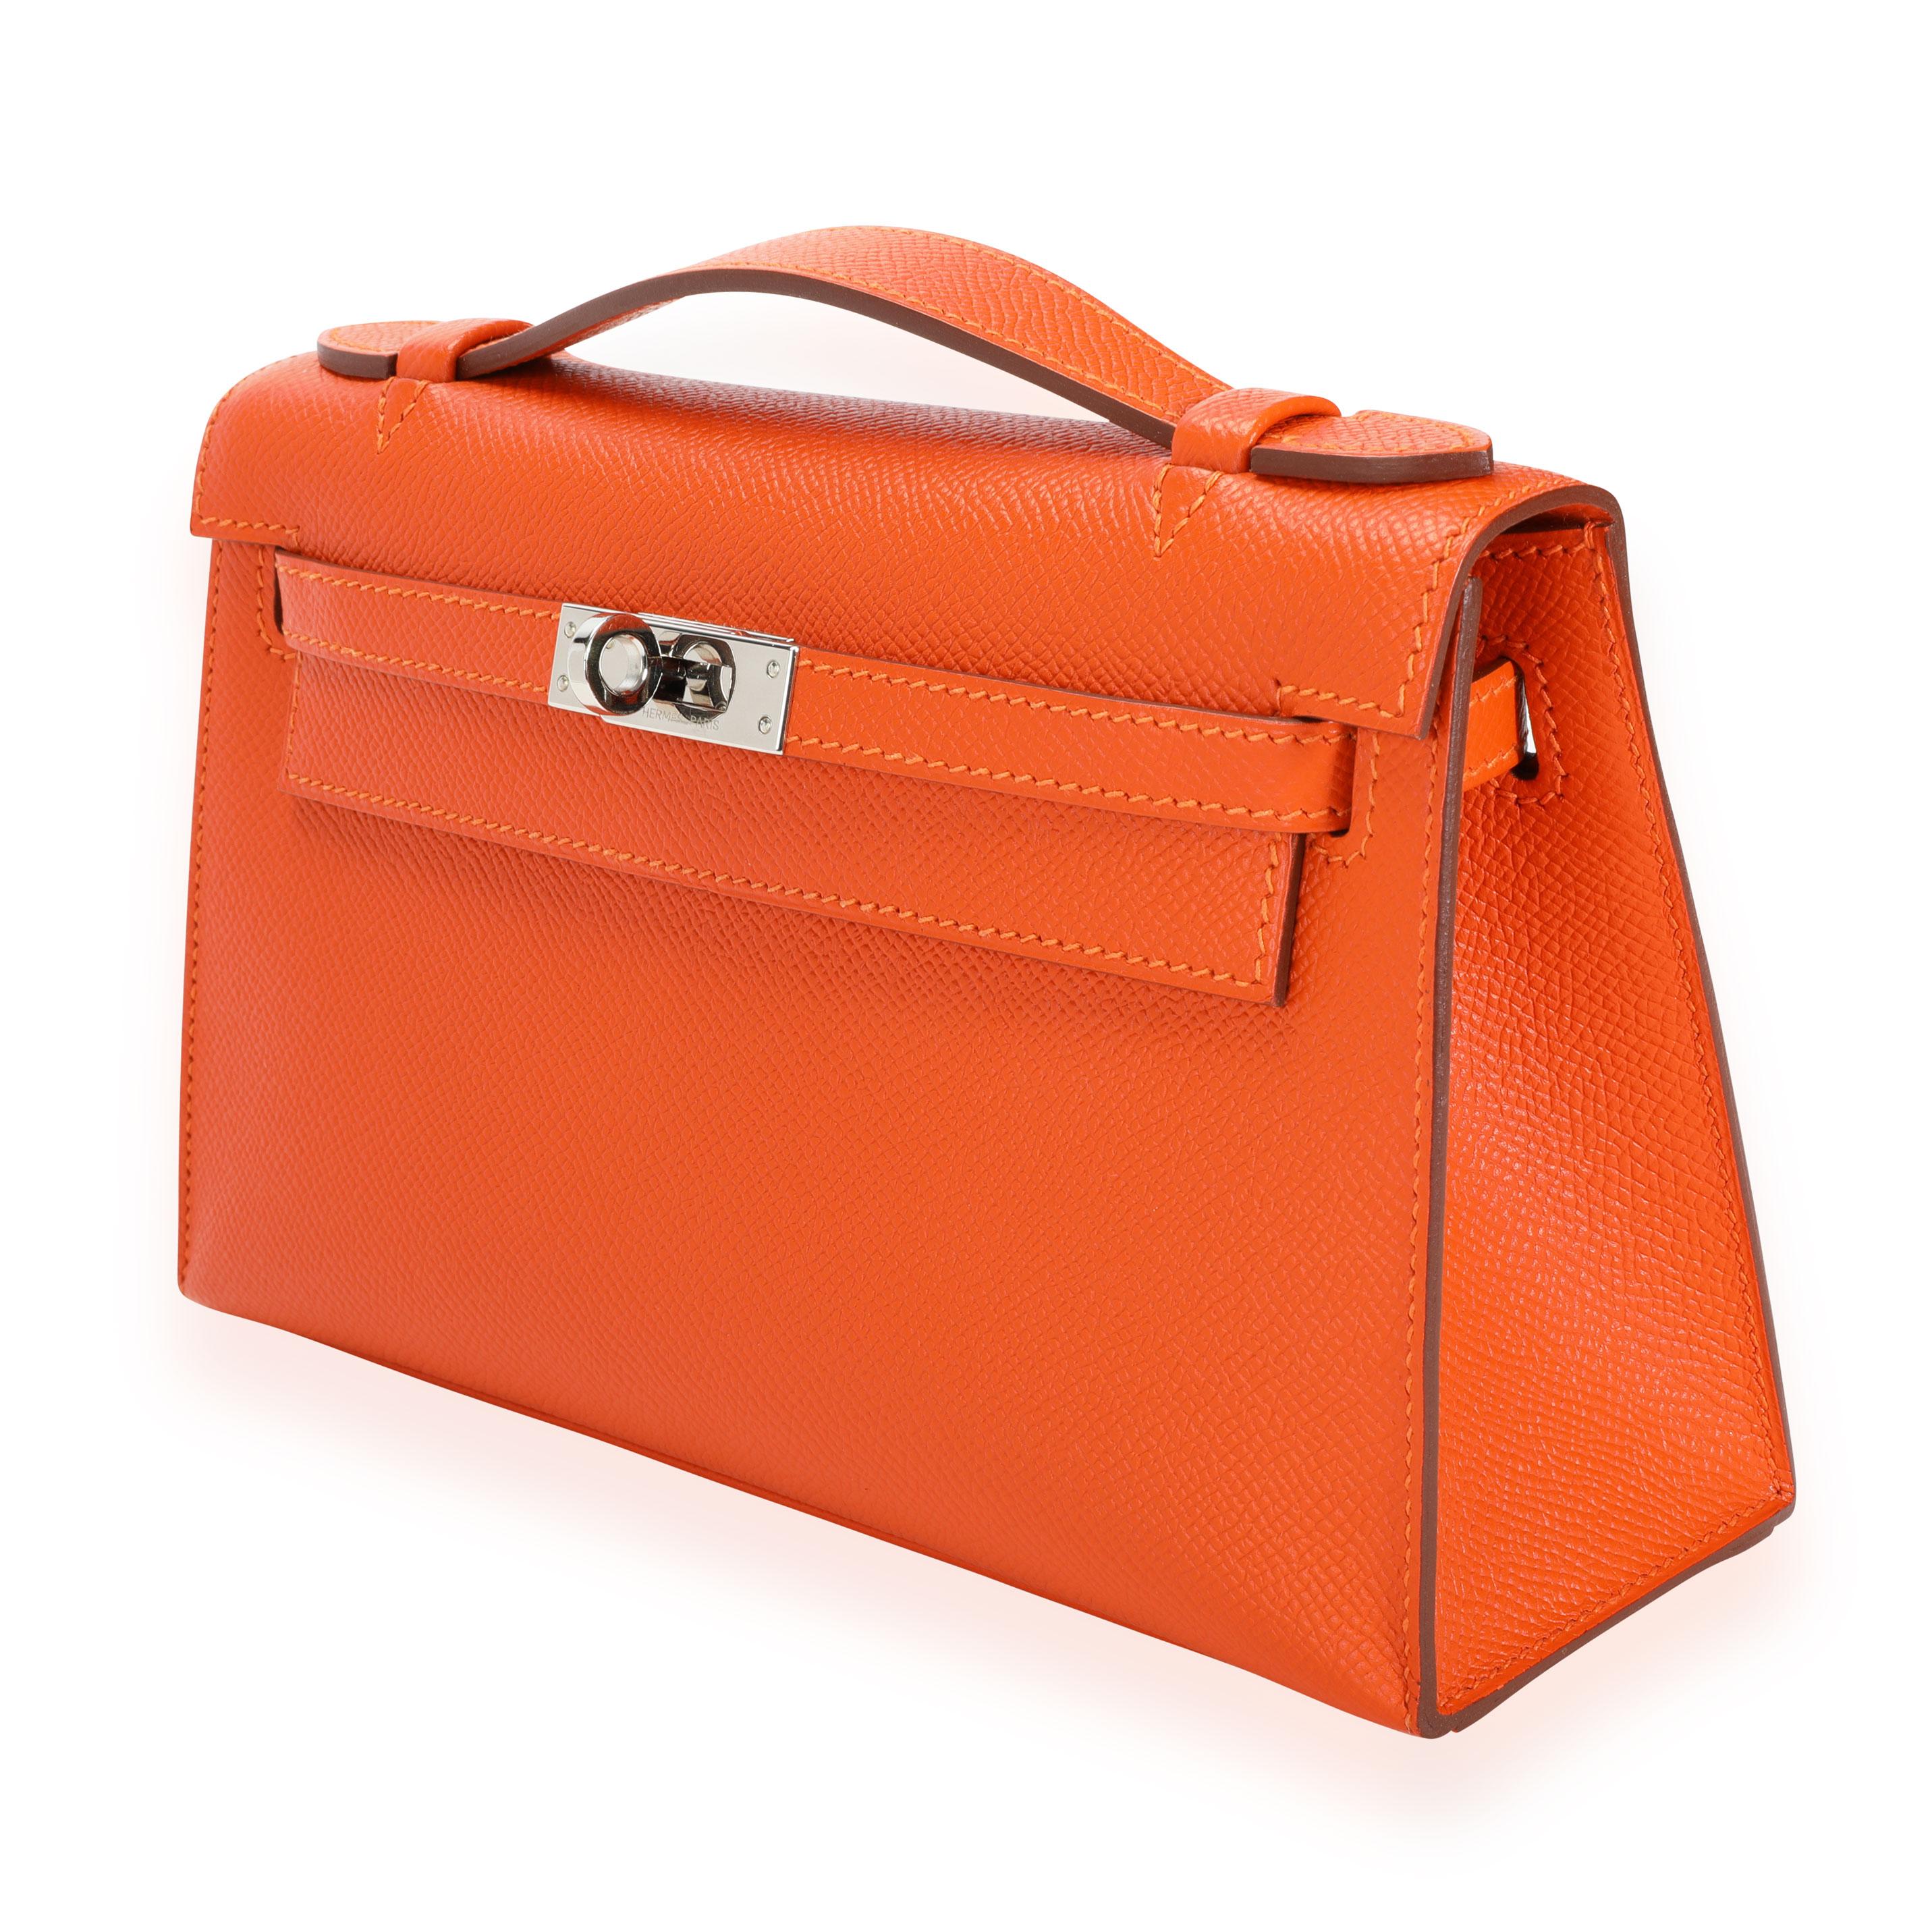 Hermès Feu Epsom Kelly Pochette PHW
SKU: 110051

Handbag Condition: Excellent
Condition Comments: Excellent Condition. Hairline scratches to hardware.
Brand: Hermès
Model: Kelly Pochette

Origin Country: France
Handbag Silhouette: Clutch; Top